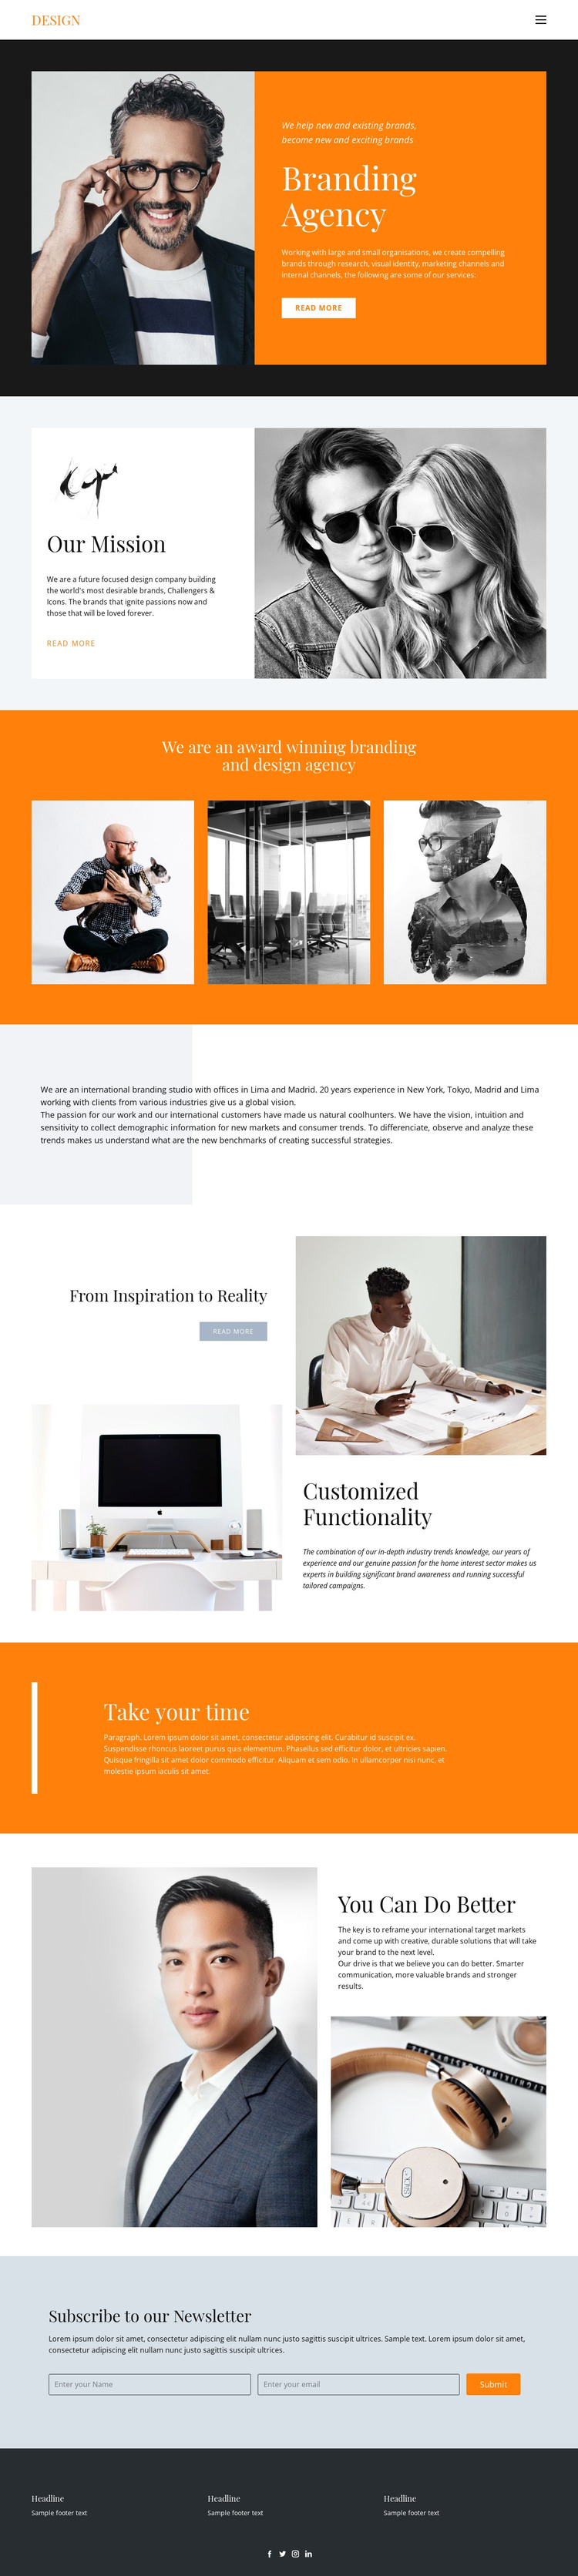 Desired results in business HTML Template